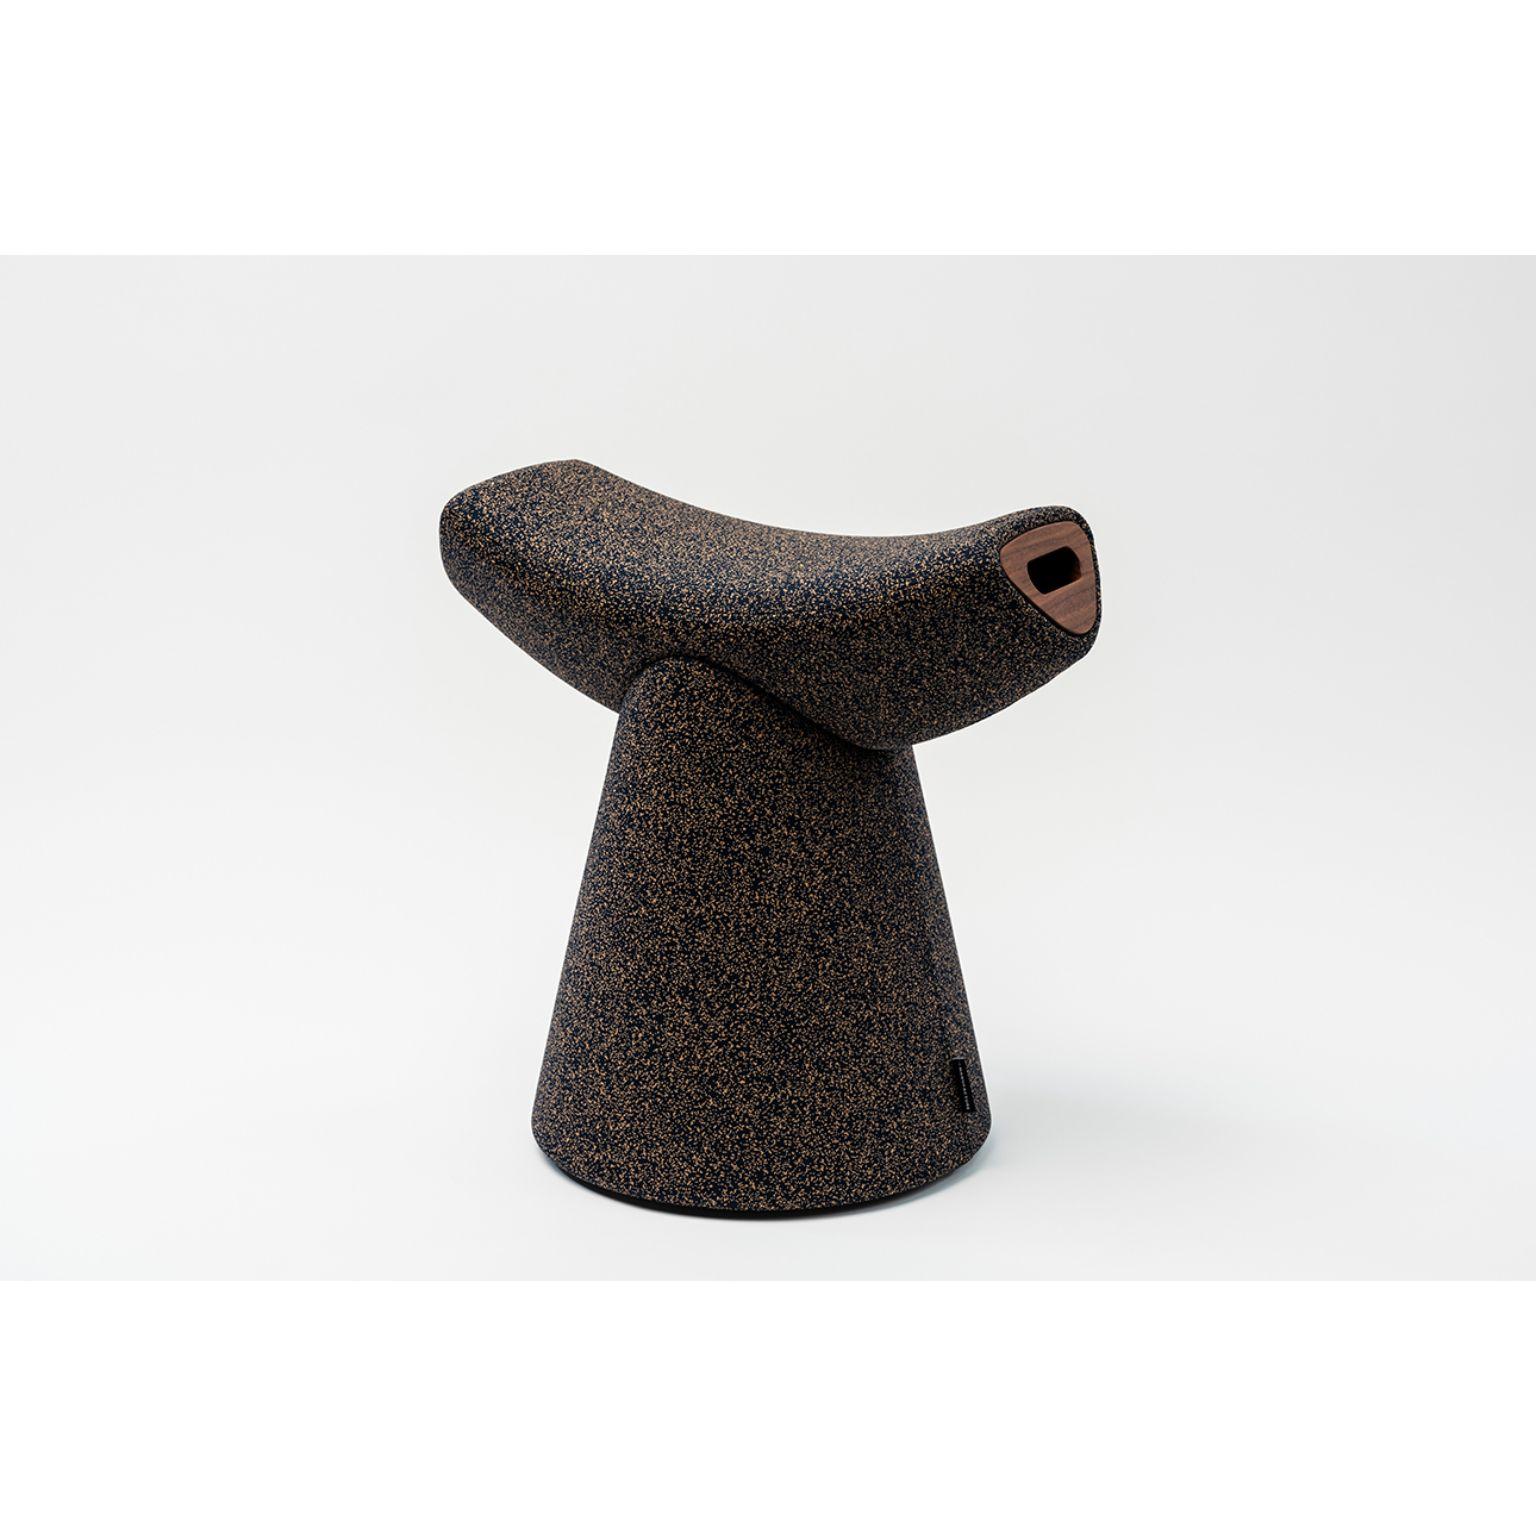 Gardian stool with handle by Patrick Norguet
Materials: Fabric (also available in leather)
 Handle: Noce Canaletto solid wood
Dimensions: W51.1 x D34.7 x H49.8 cm

For the Gardian stool by designer Patrick Norguet, the concept of seating was